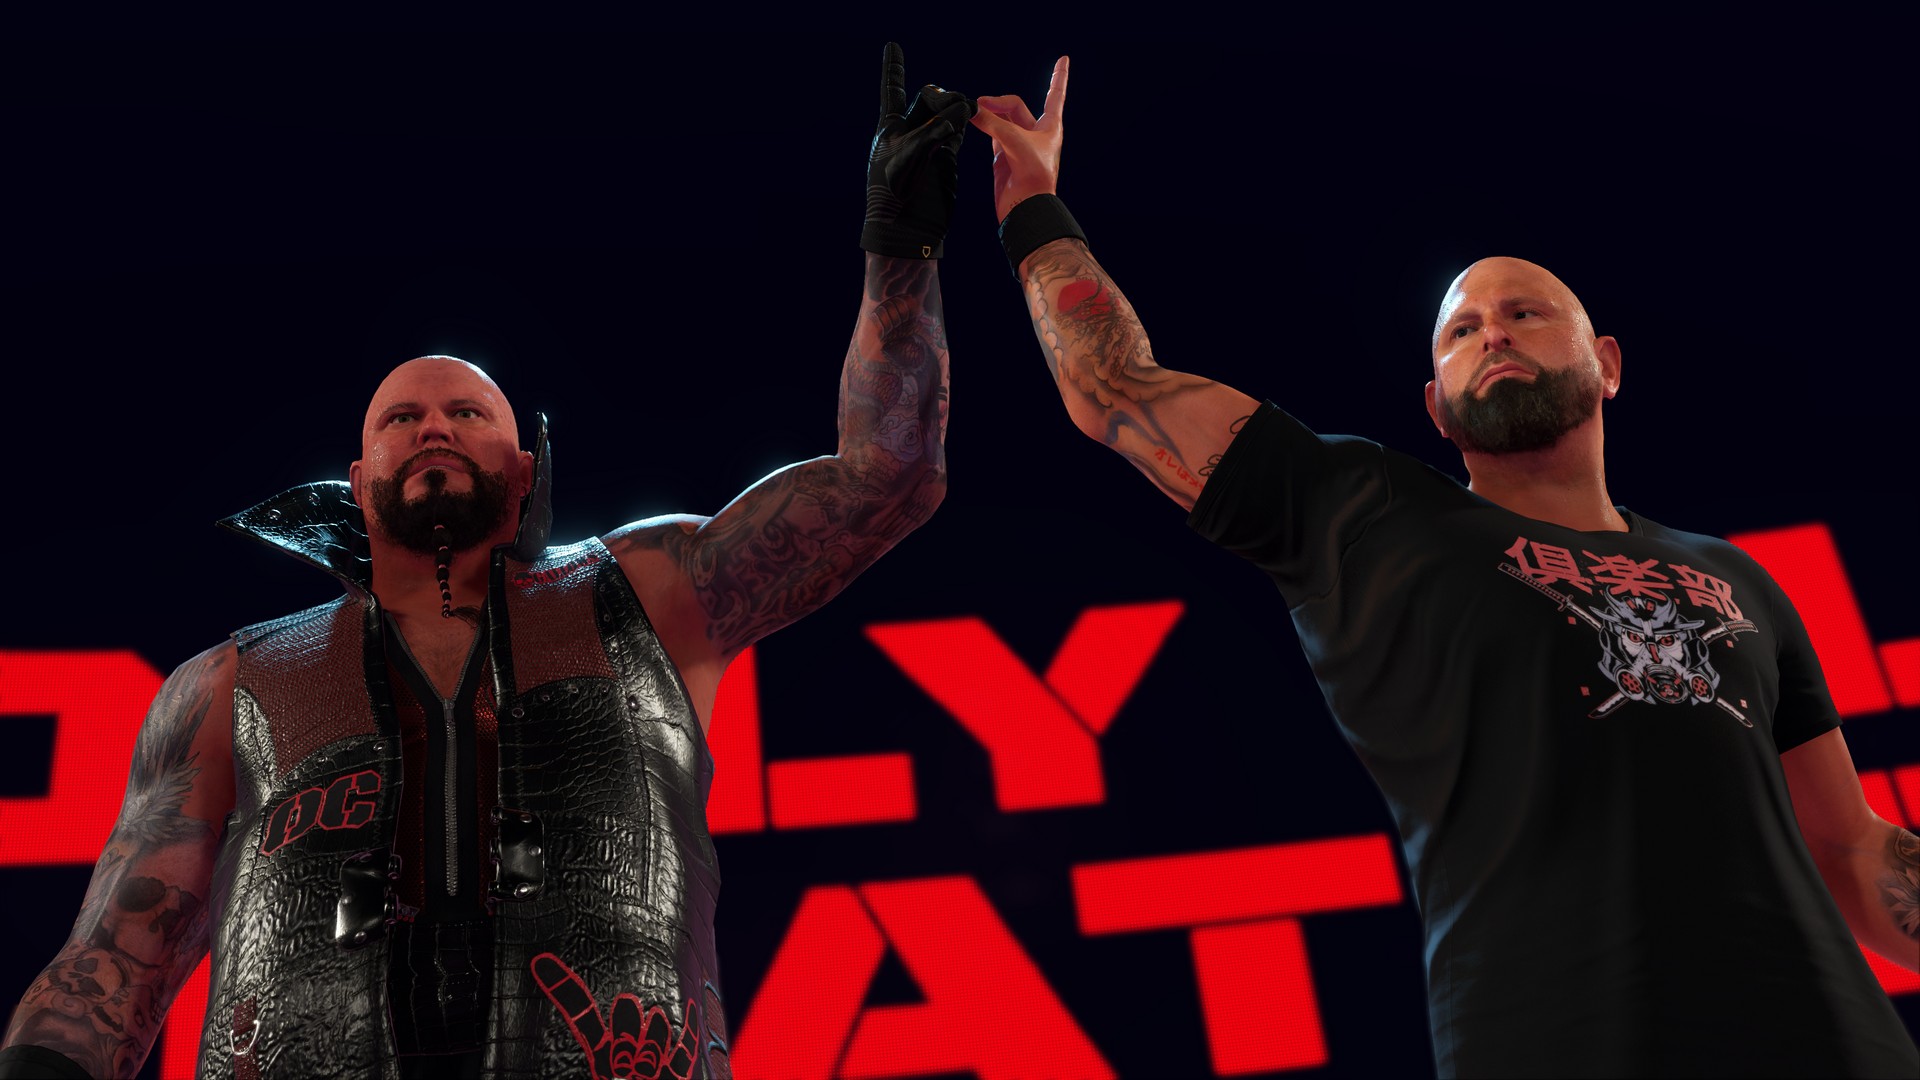 Say “Howdy” to the WWE® 2K23 Revel with Wyatt Pack